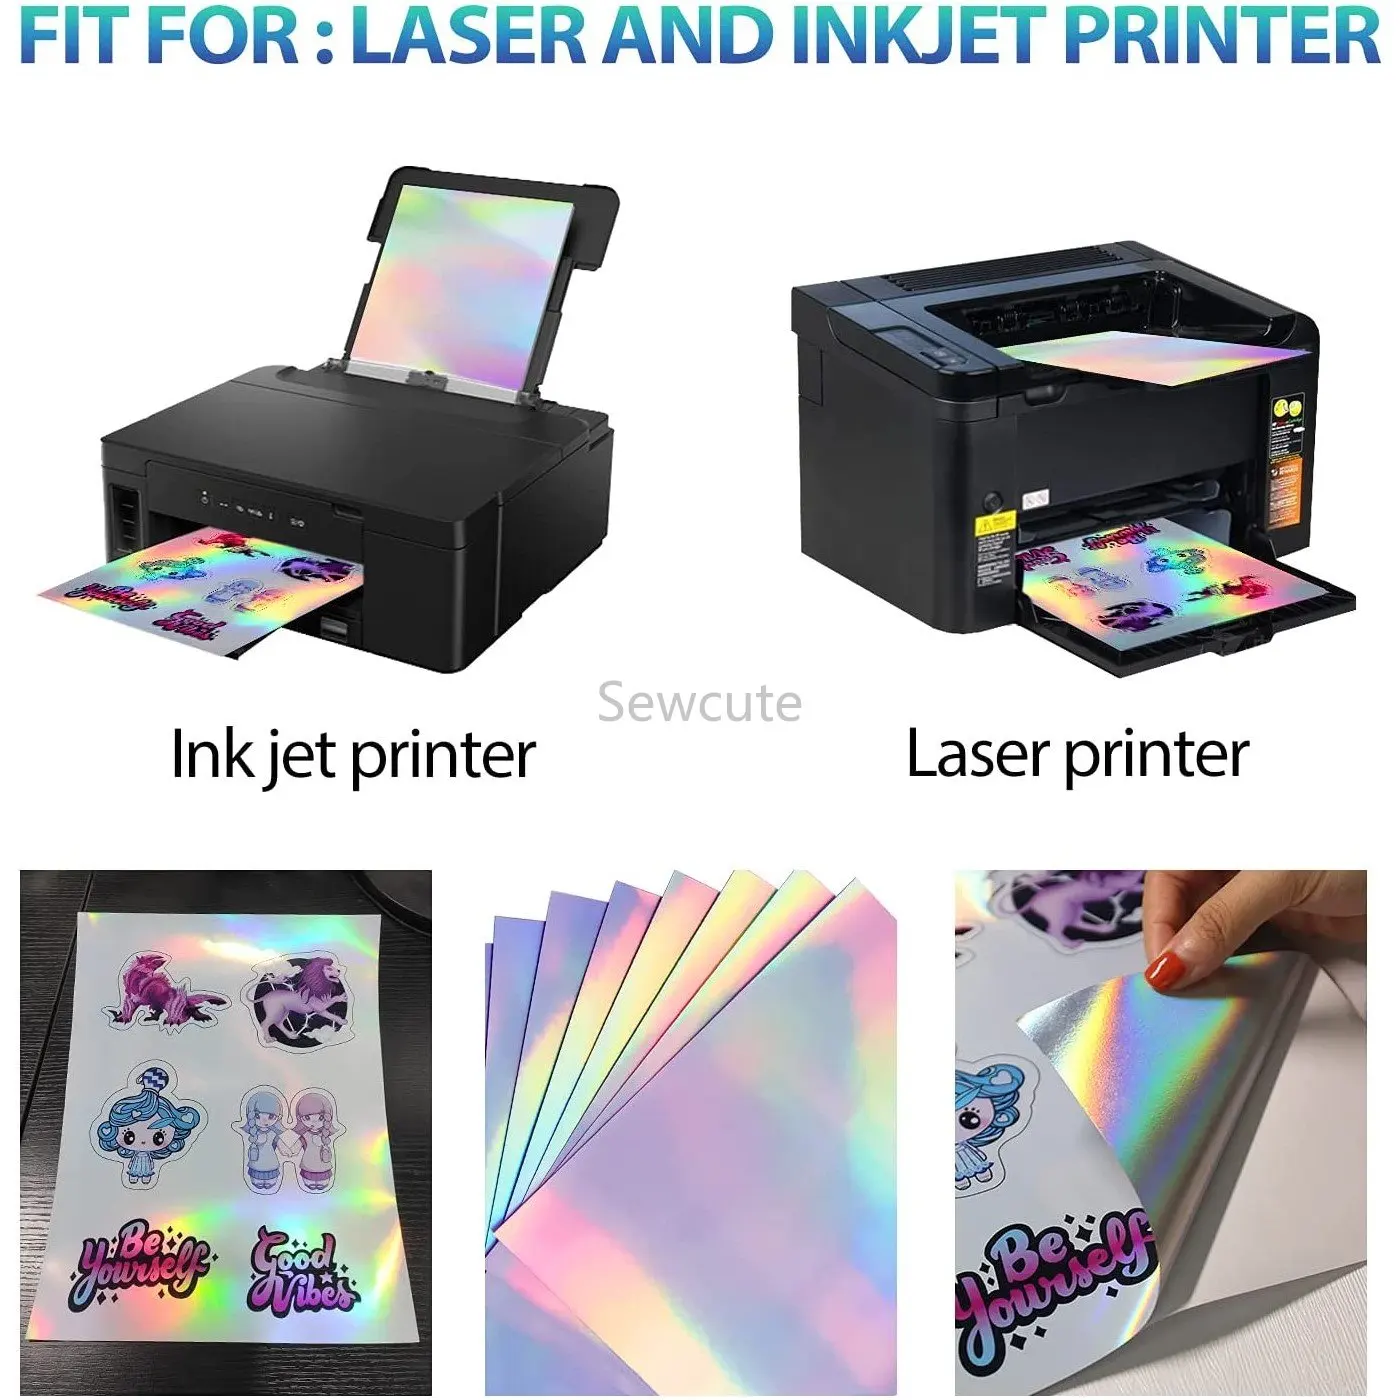 10Sheets Holographic Sticker Paper Vinyl Sticker Paper for Ink Jet Laser Printer Printable Adhesive Waterproof Dries Quickly